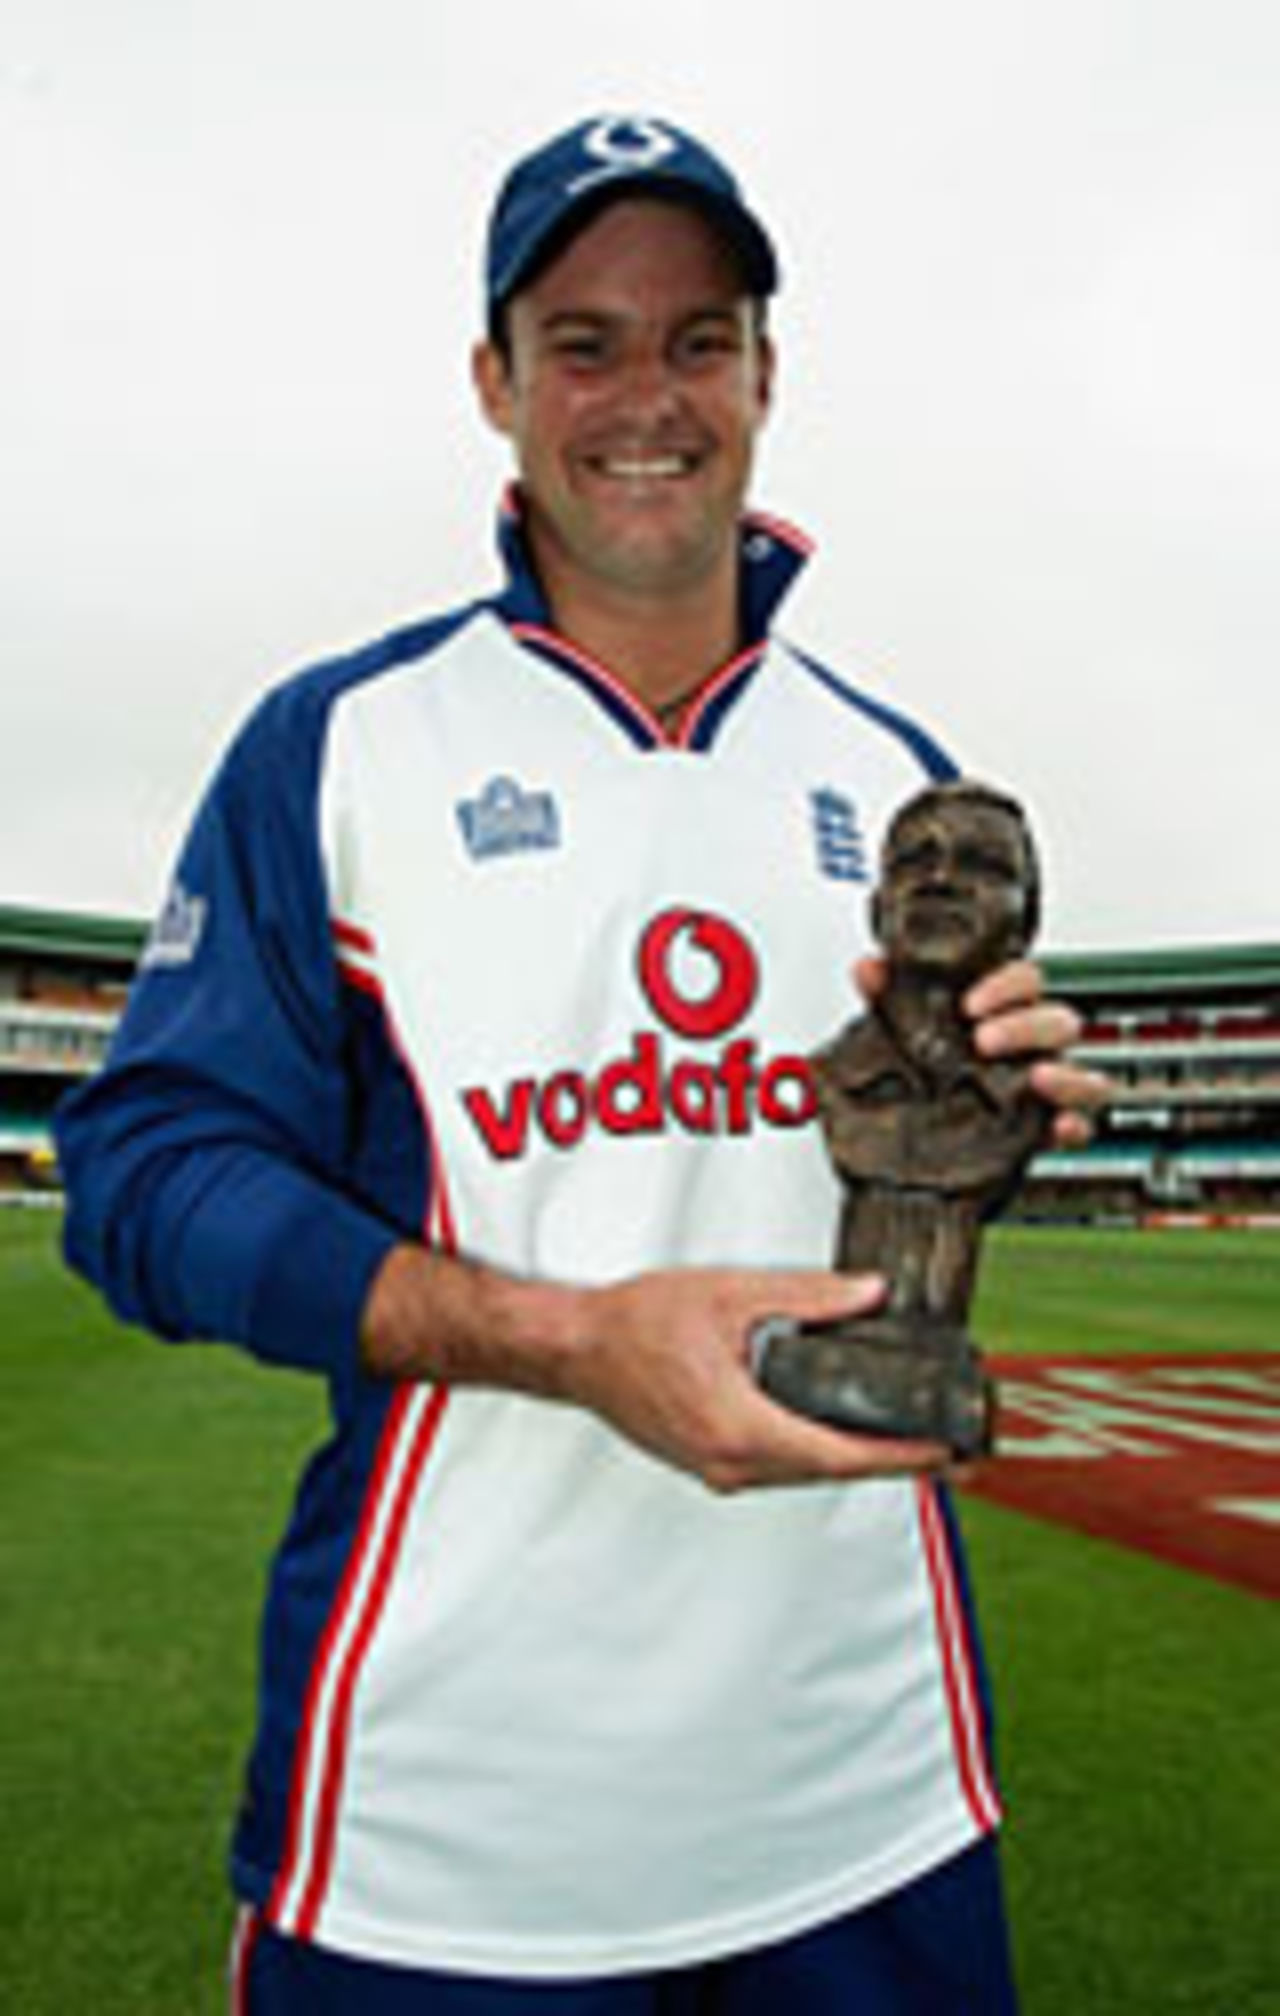 Andrew Strauss with his man-of-the-match trophy, South Africa v England, 1st Test, Port Elizabeth, 5th day, December 21 2004